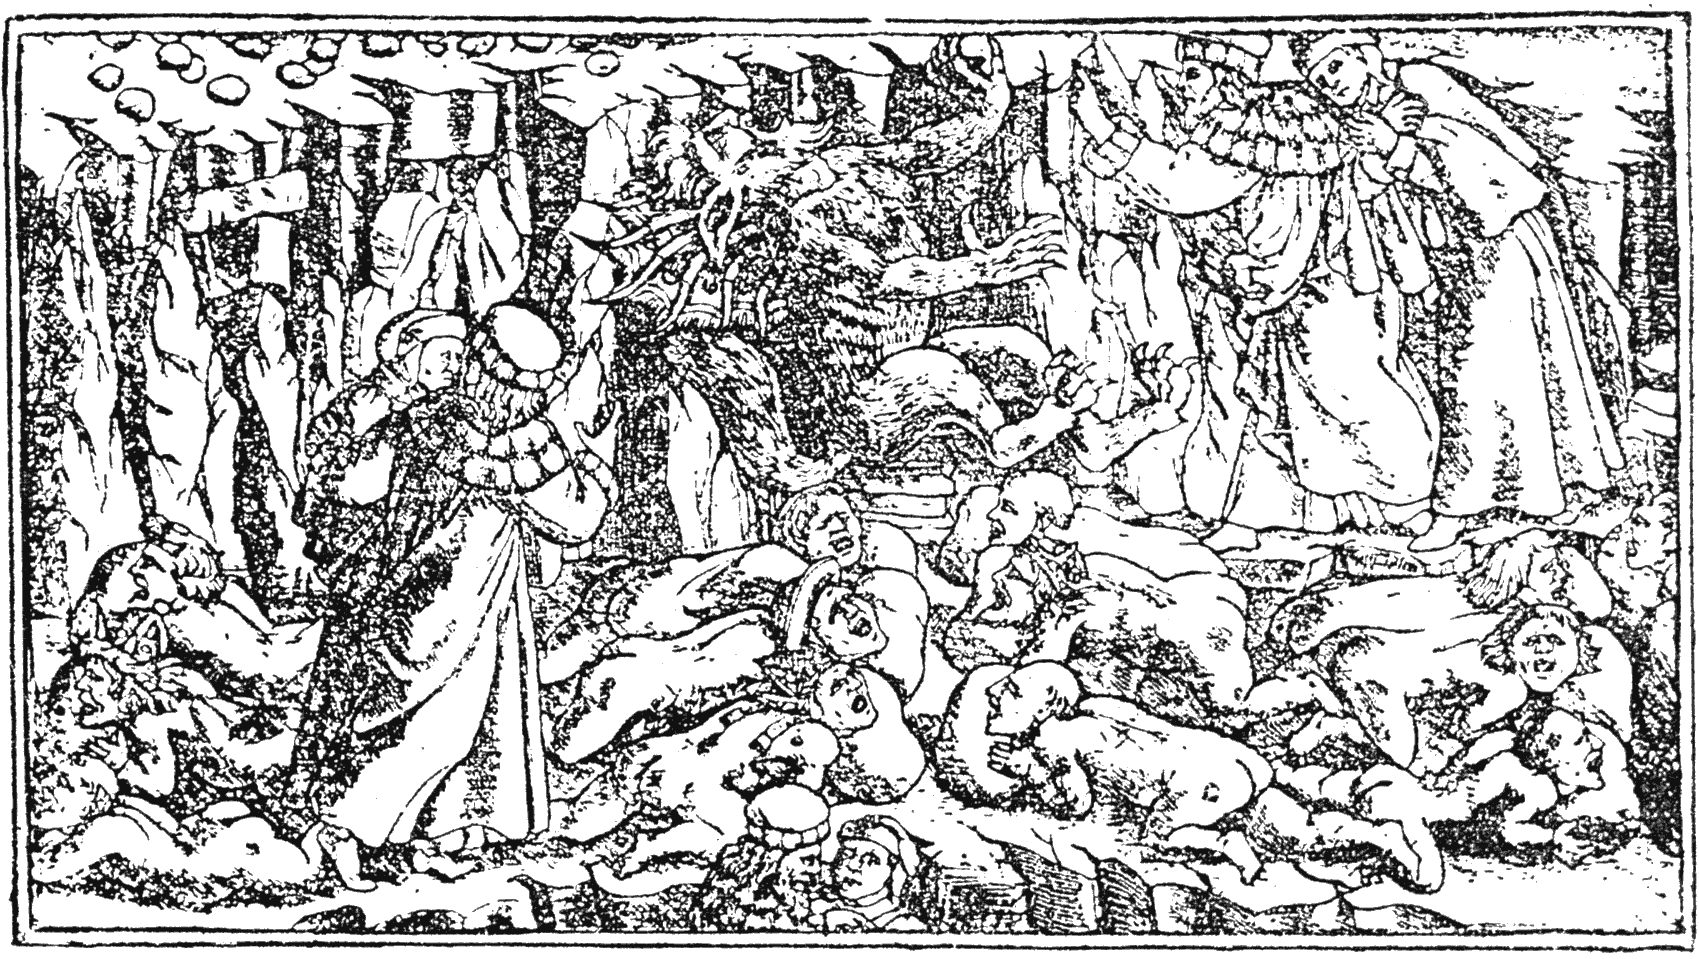 Metal engraving by Baccio Baldini from the Dante of 1481. From Henri Bouchot 'The Printed Book' (1887), page 54, published size in Bouchot 8.4cm wide by 4.7cm high.